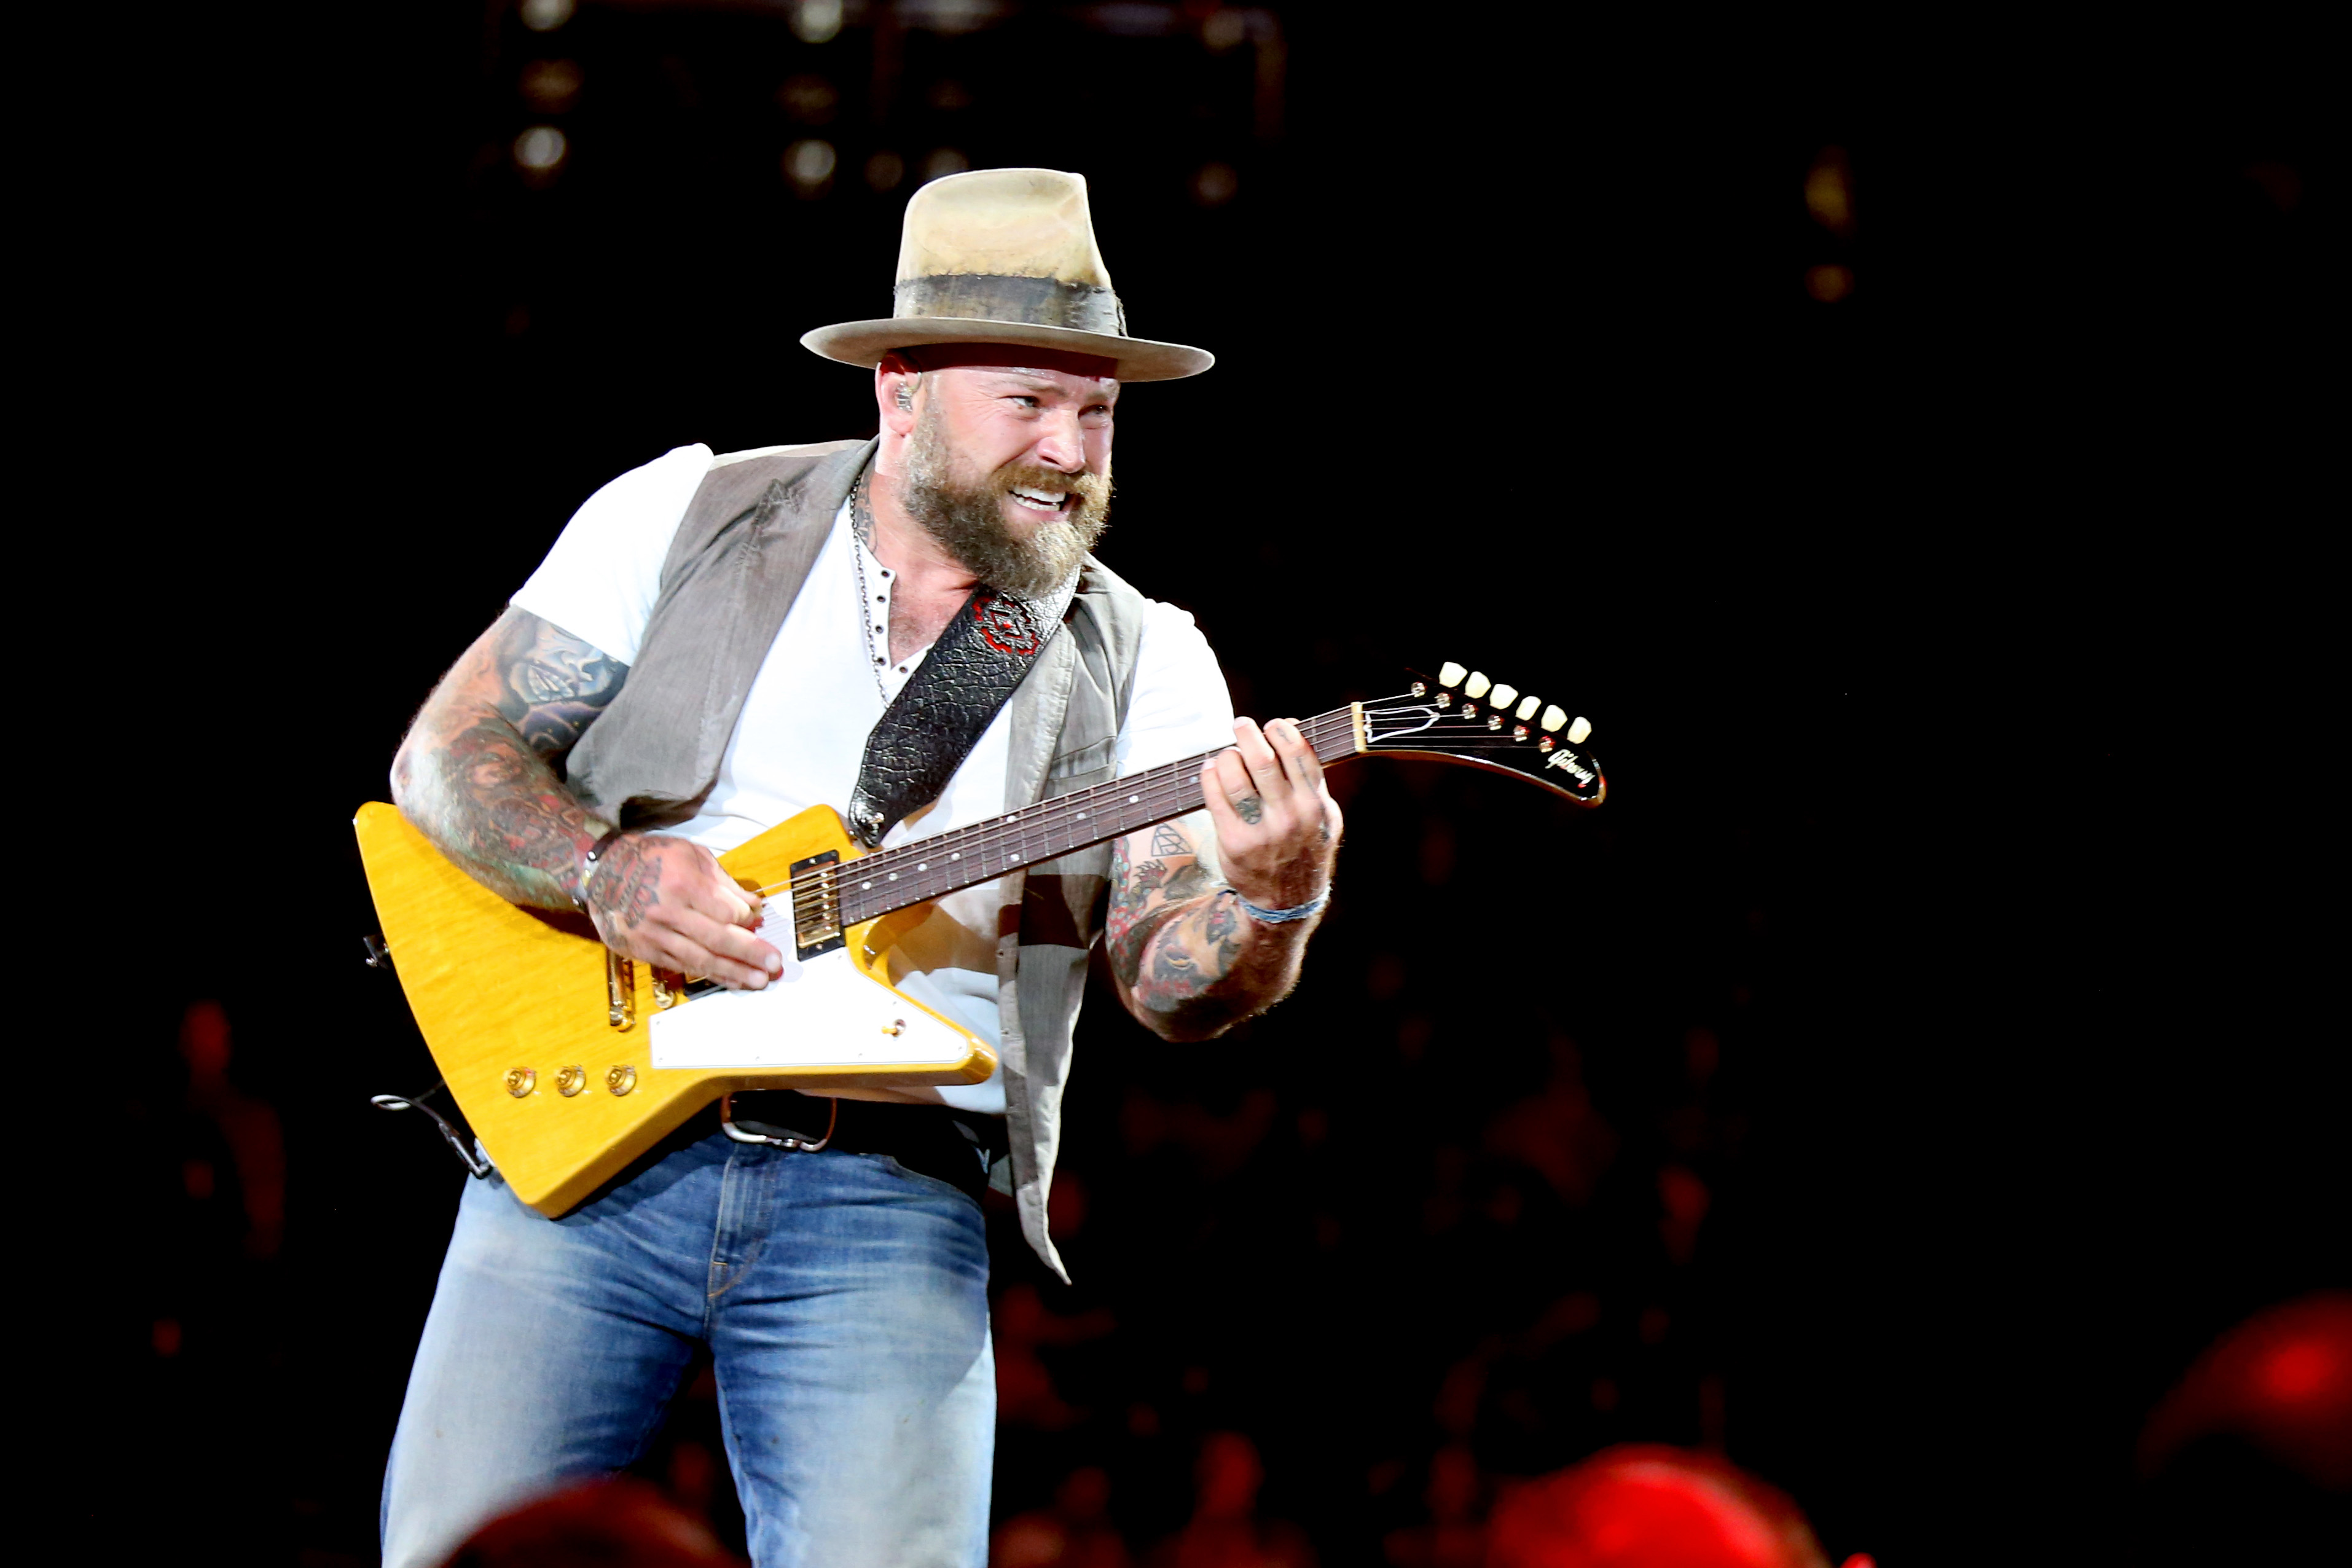 The creation of the Zac Brown Band started in 2002